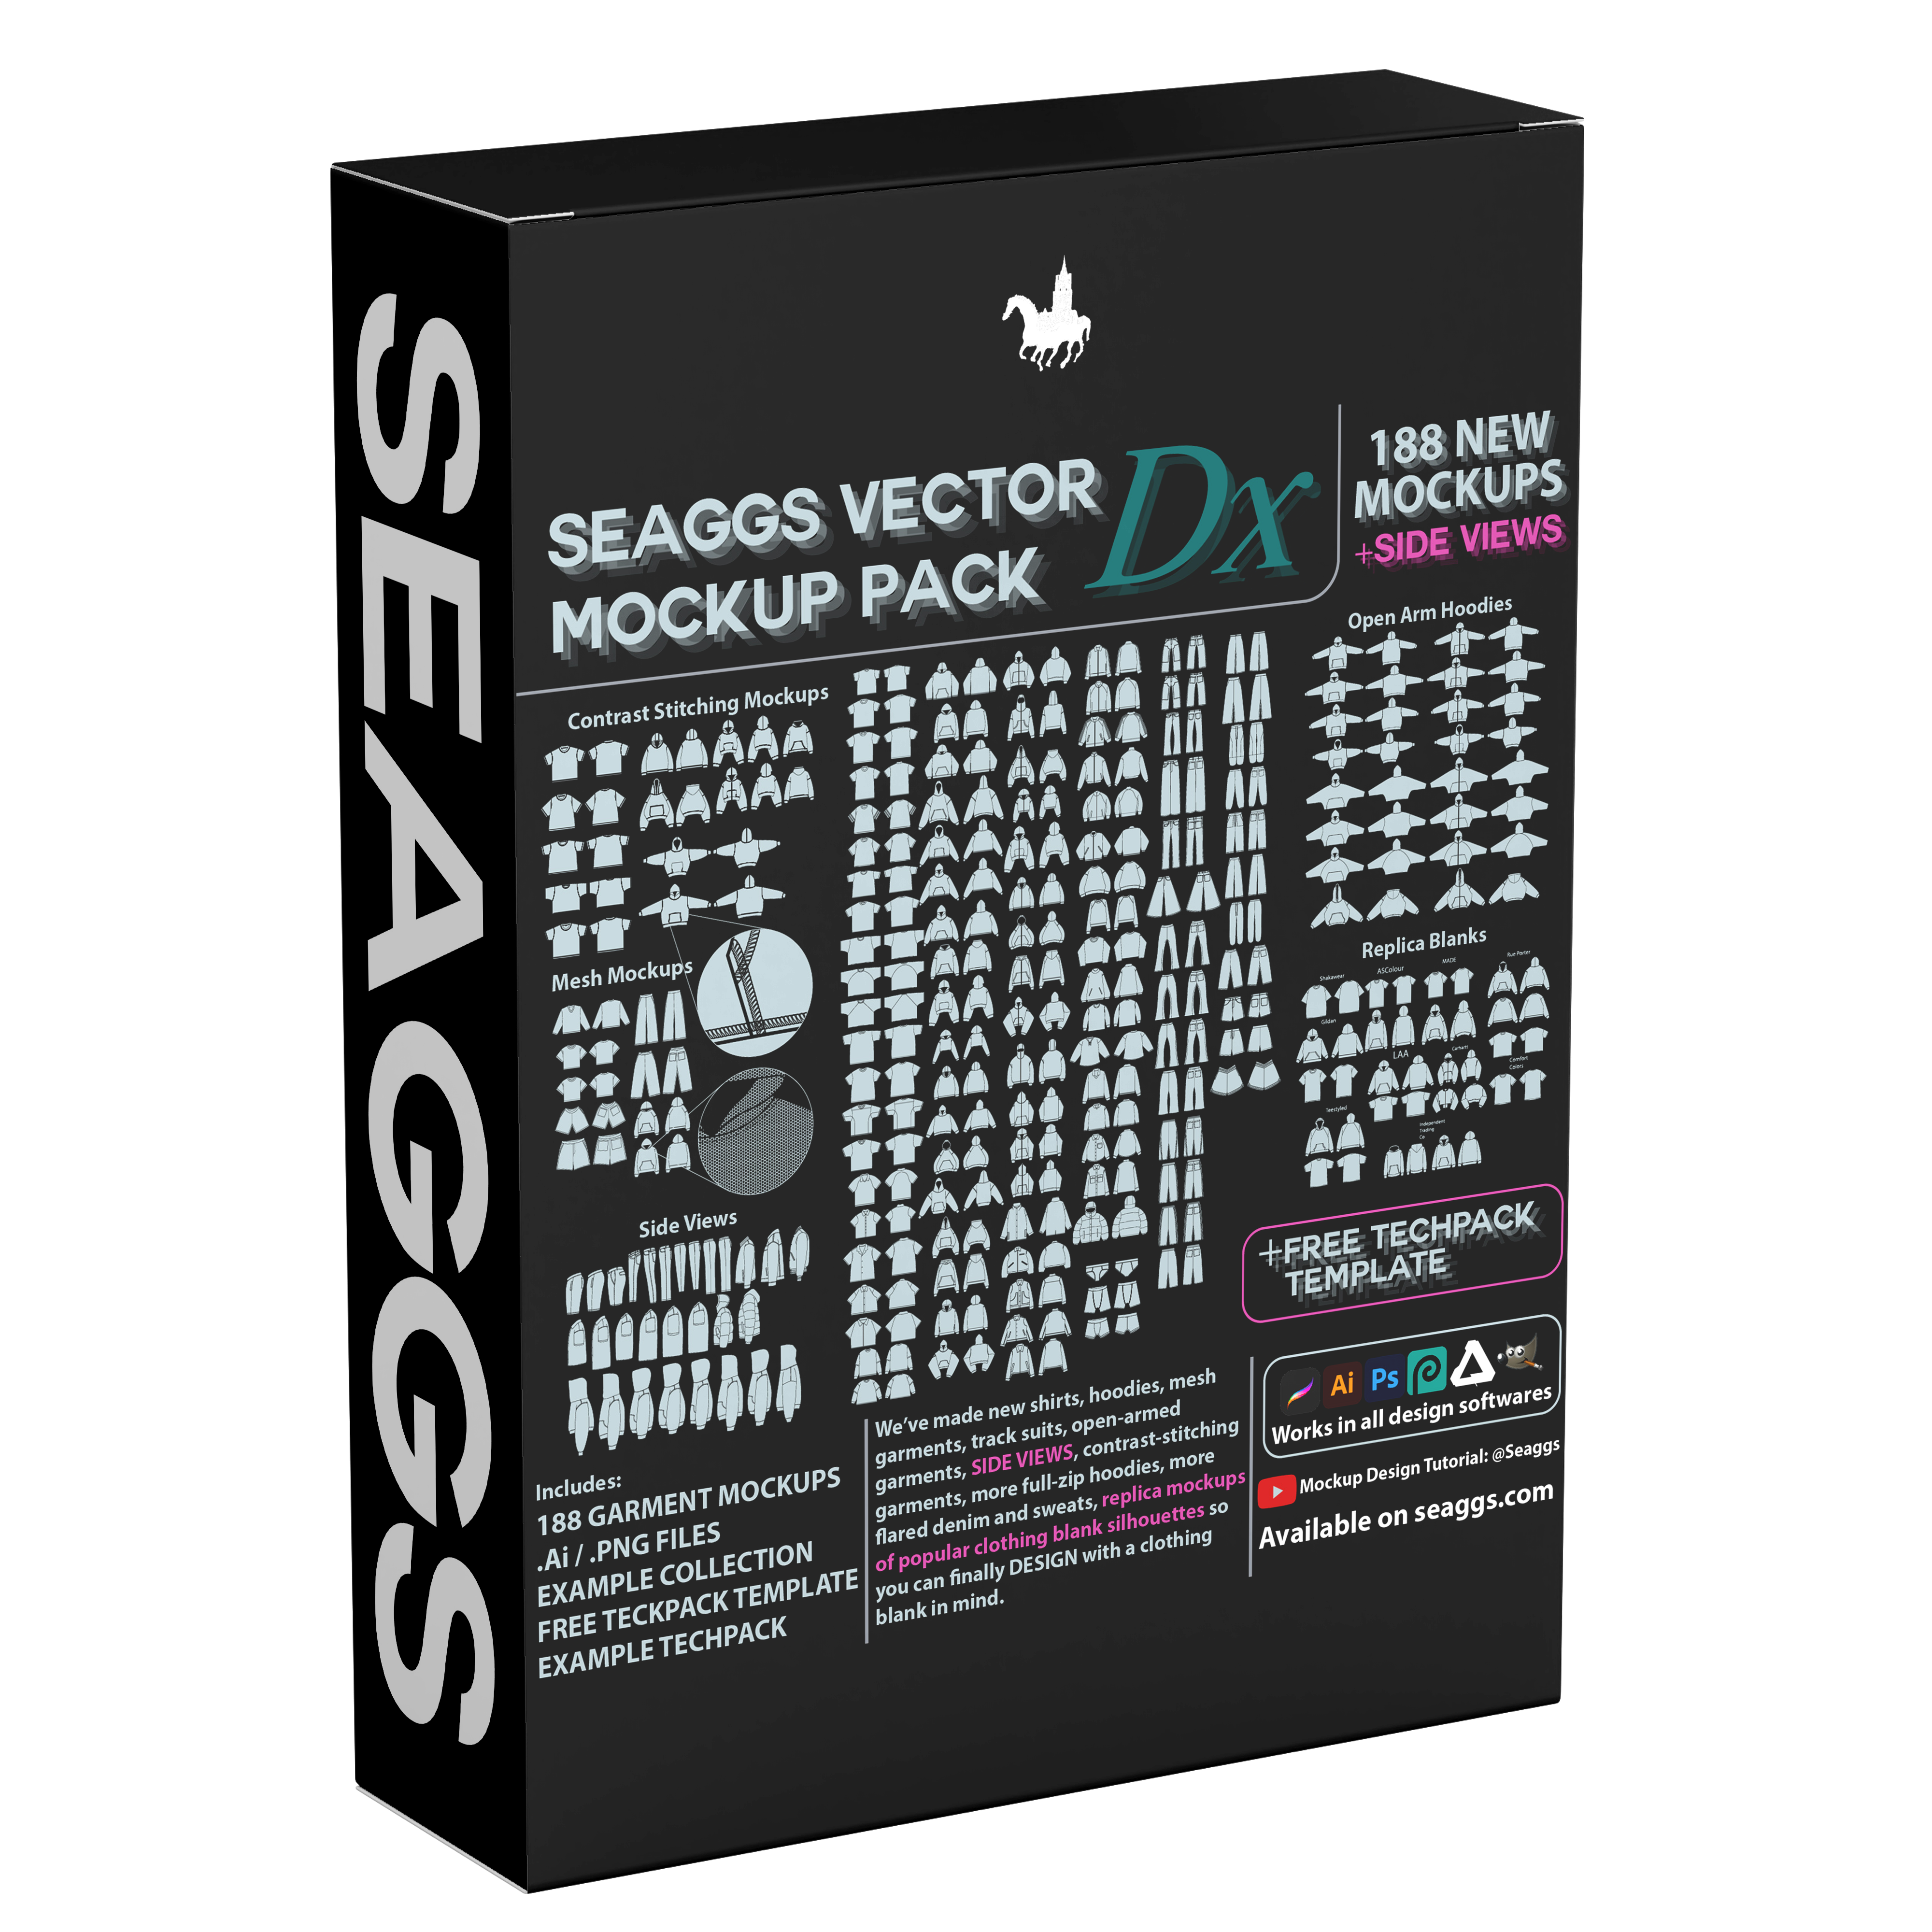 Seaggs Premium Vector Mockup Pack Dx